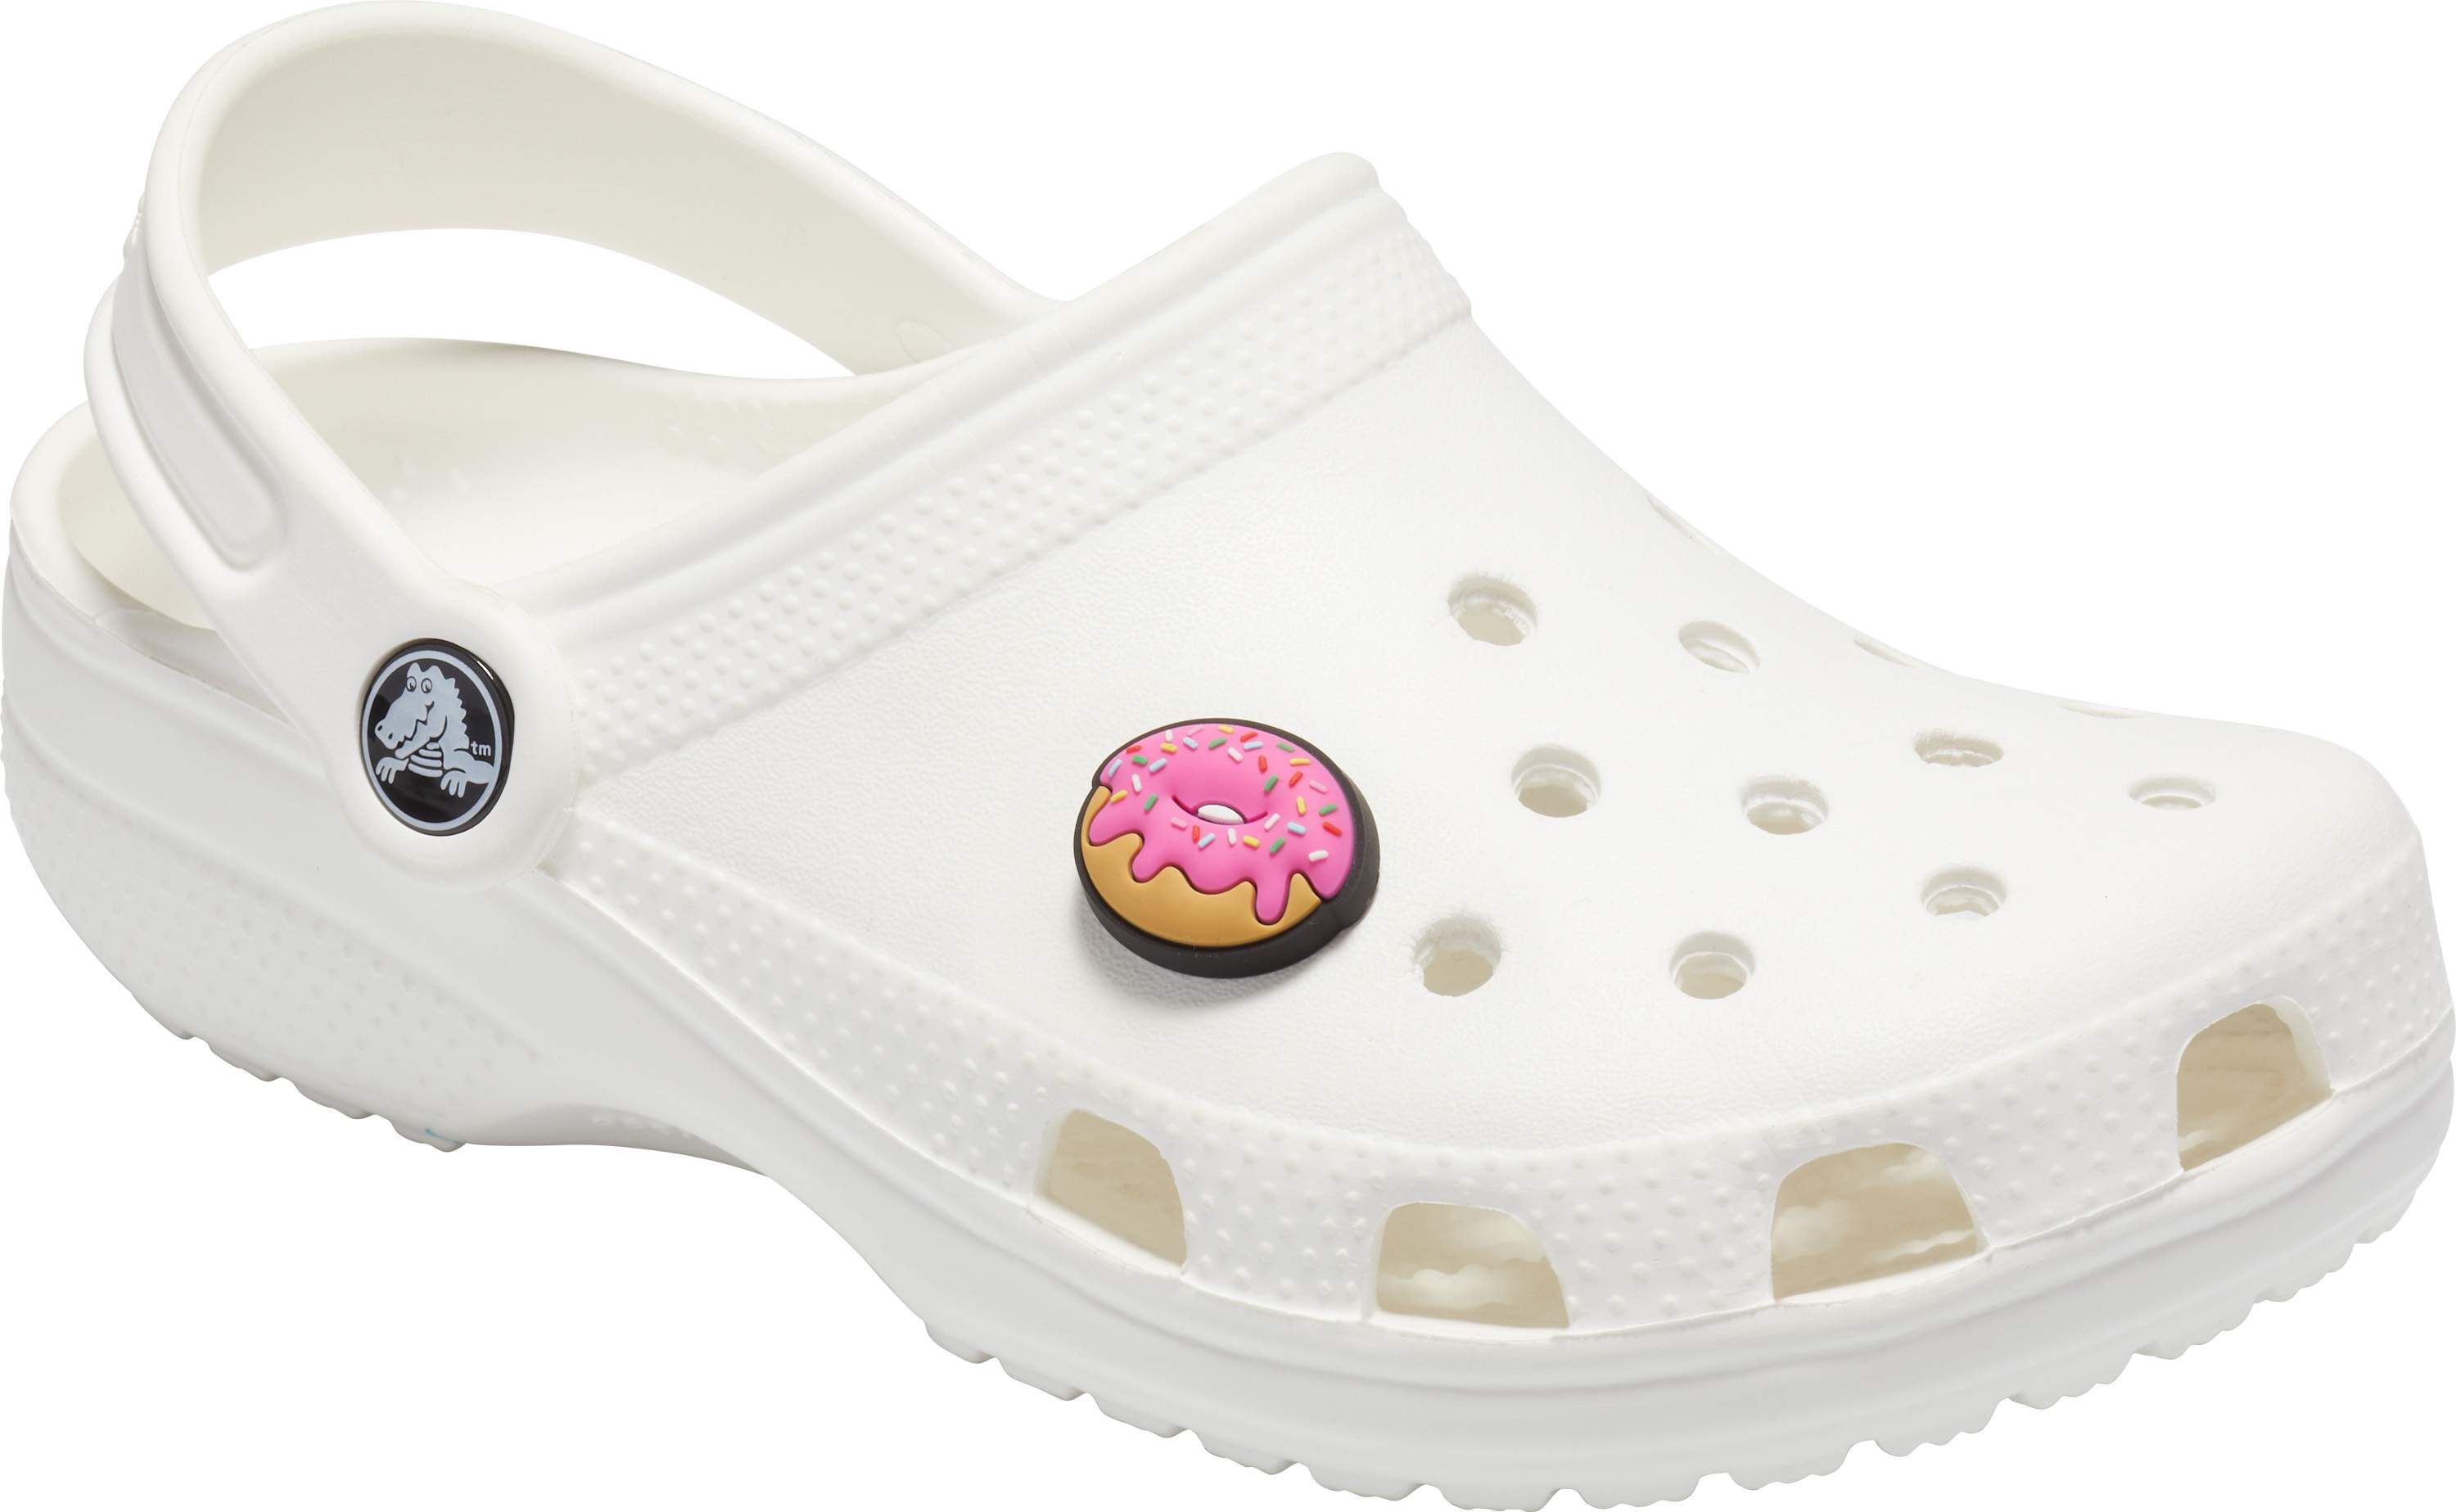 crocs with donuts